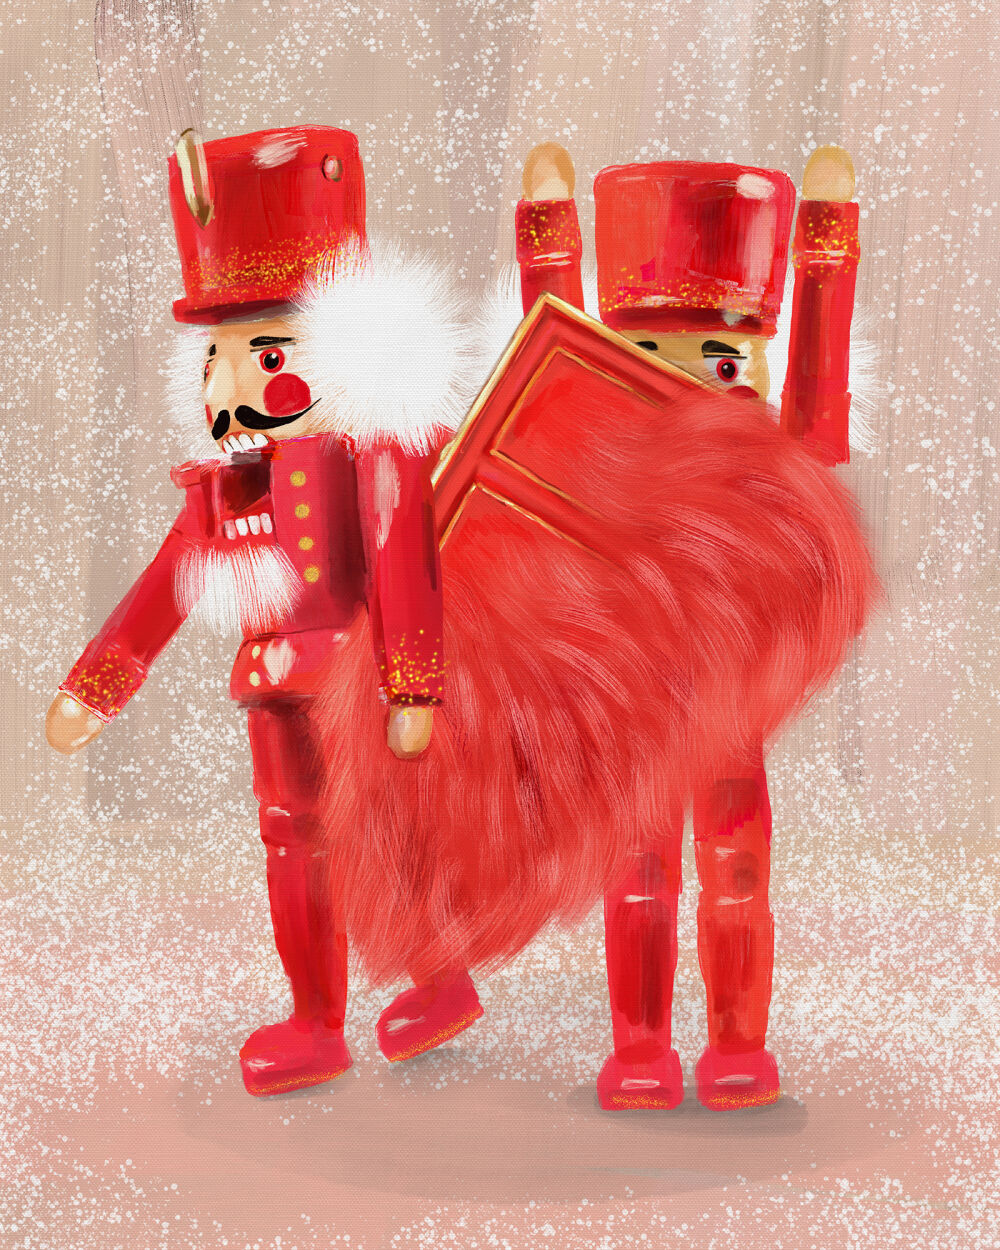 Christmas campaign illustrated by Christina Gliha